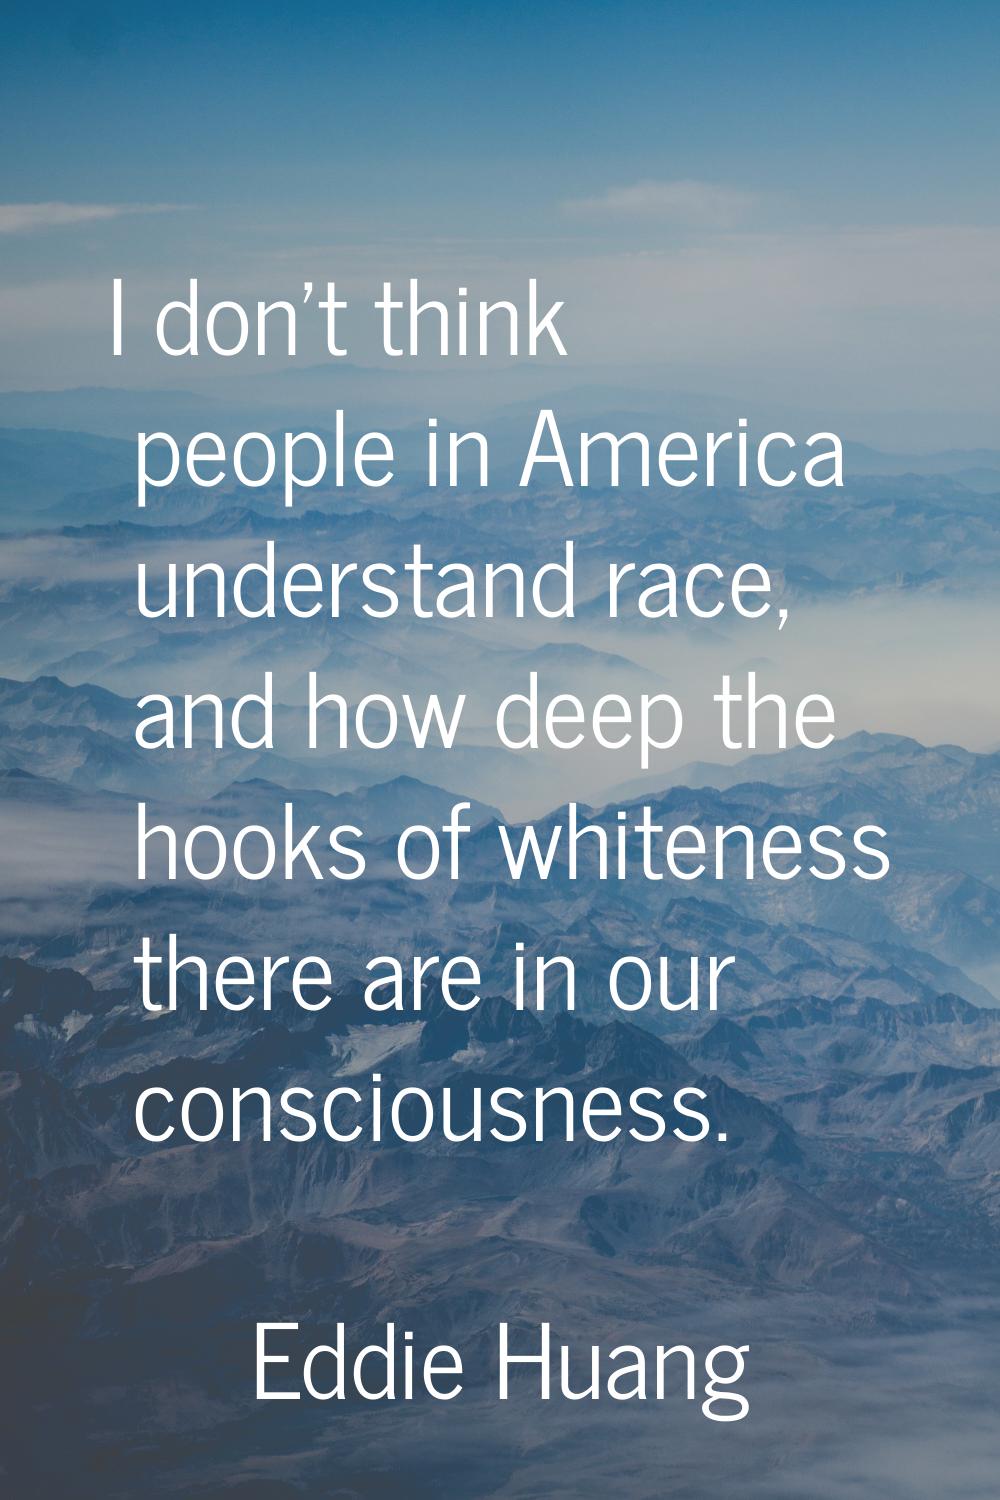 I don't think people in America understand race, and how deep the hooks of whiteness there are in o